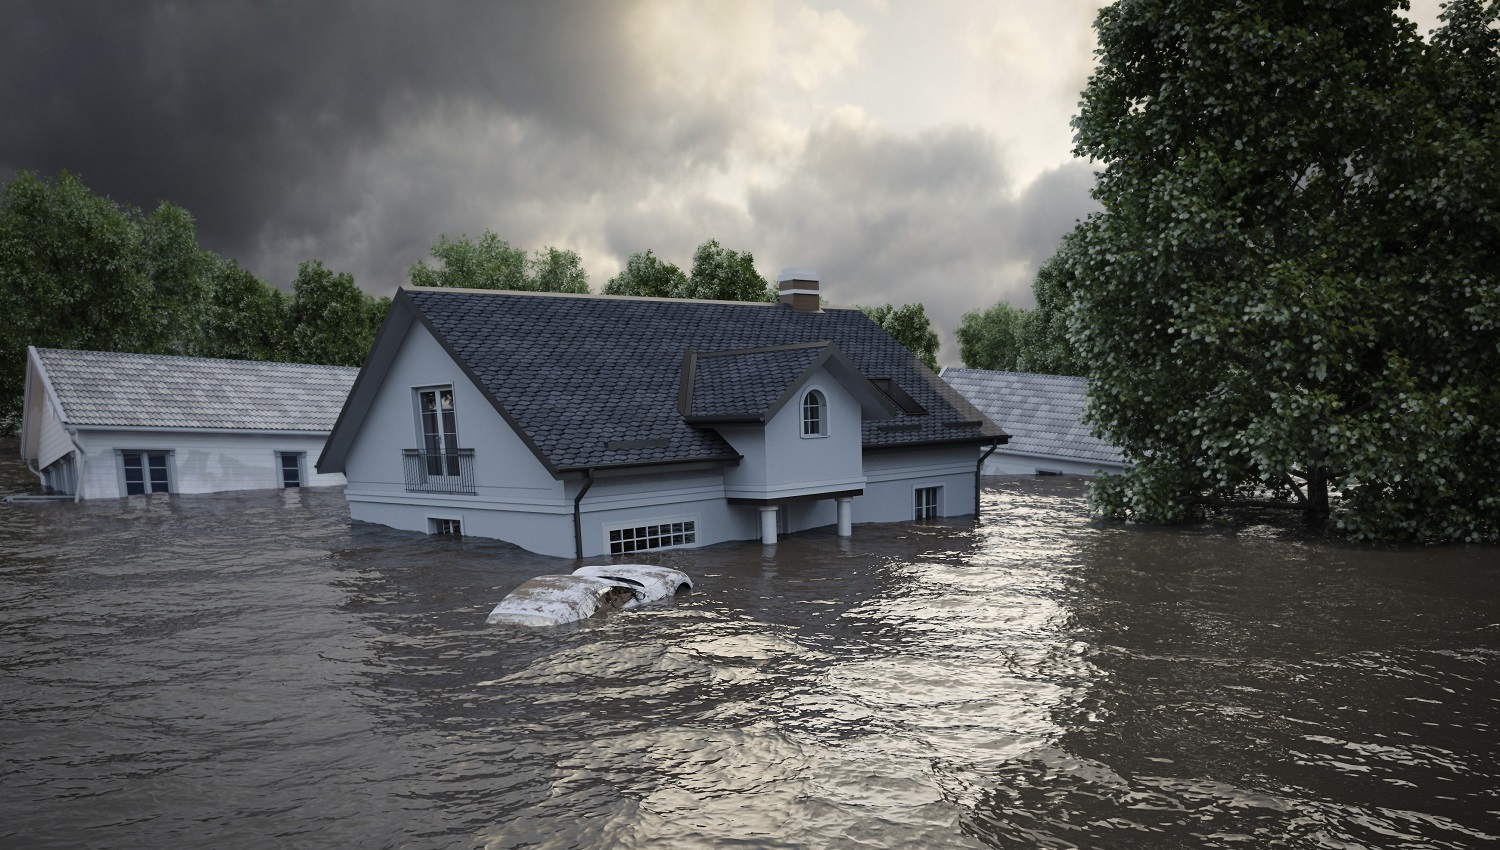 What Kind of Warning System Should be Used in Flood-Risk Areas?